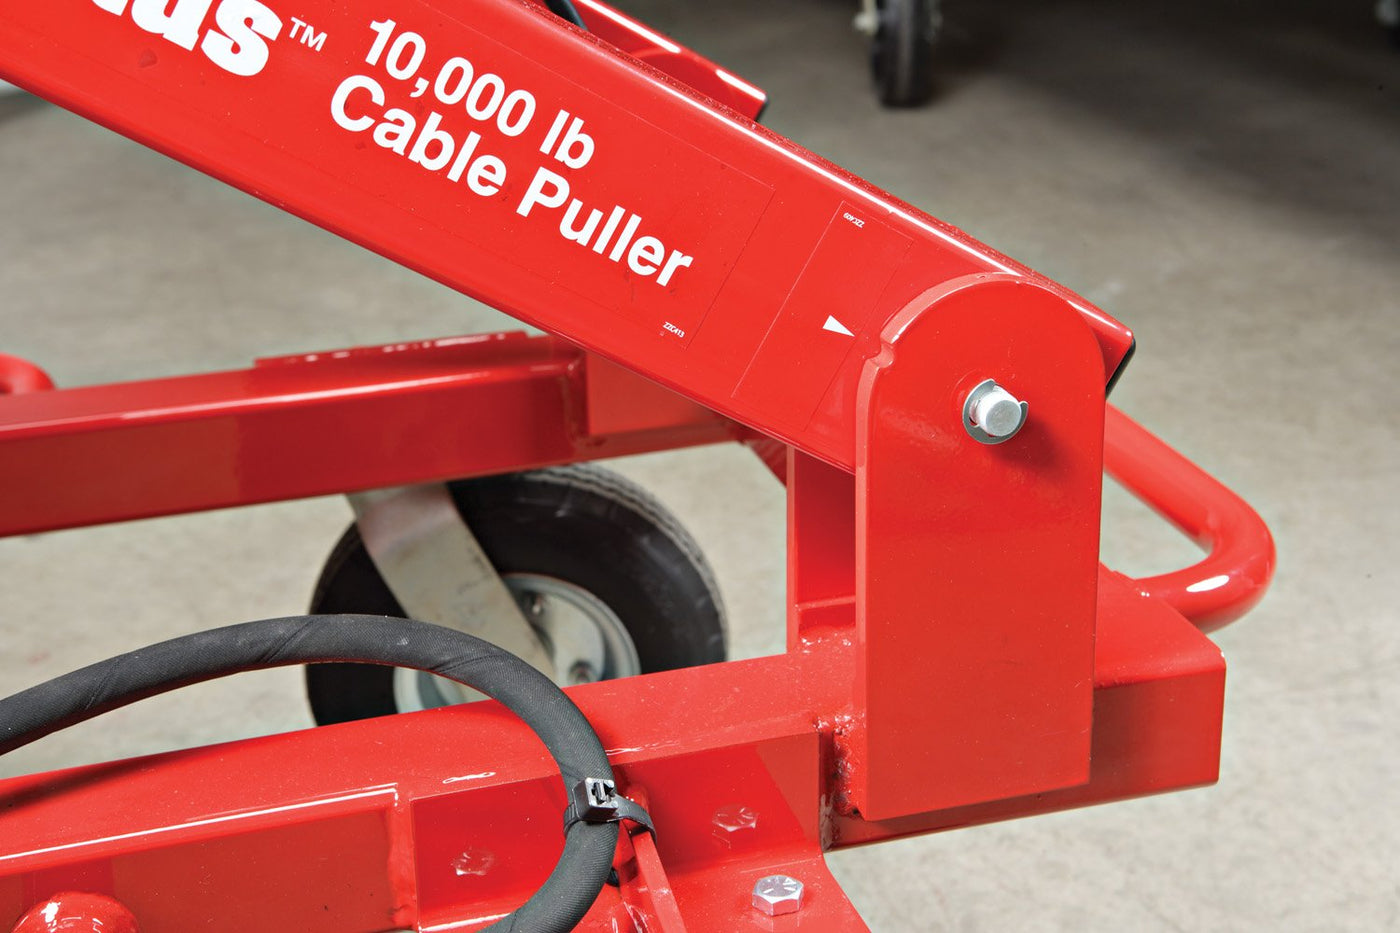 Ultra Brutus Cable Puller